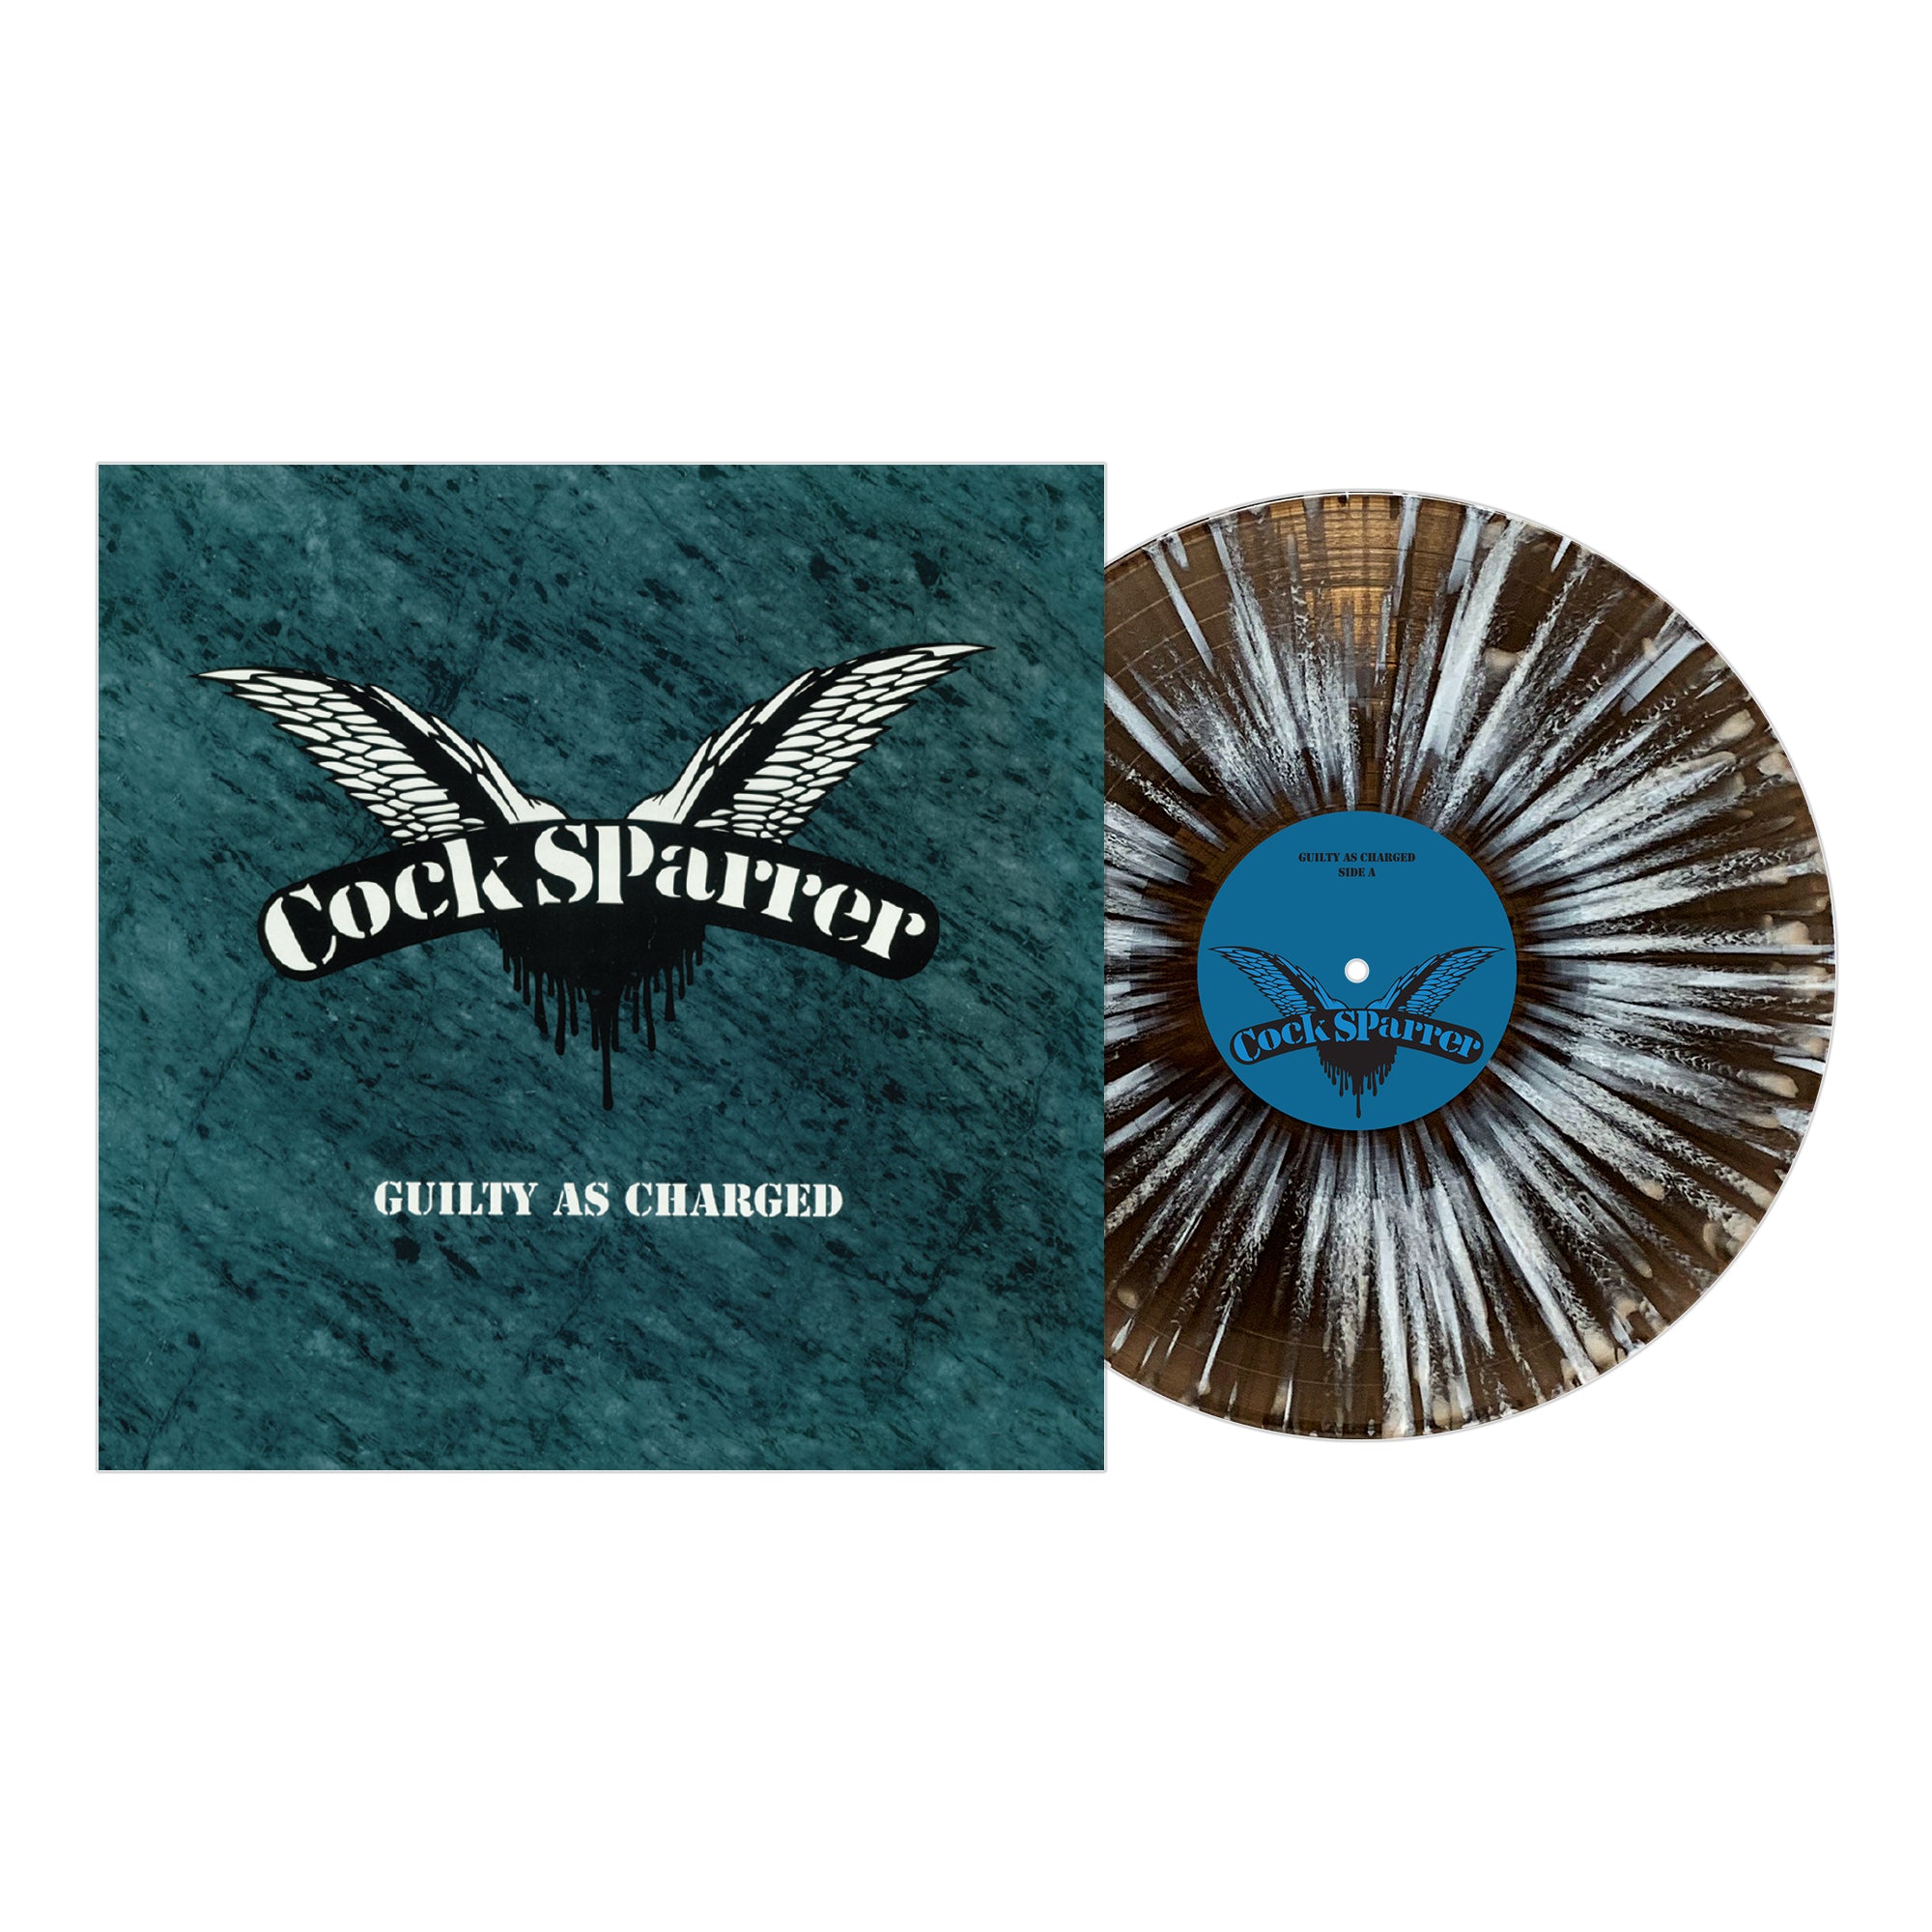 Cock Sparrer - Guilty As Charged - Black Ice w/ White Splatter - Vinyl